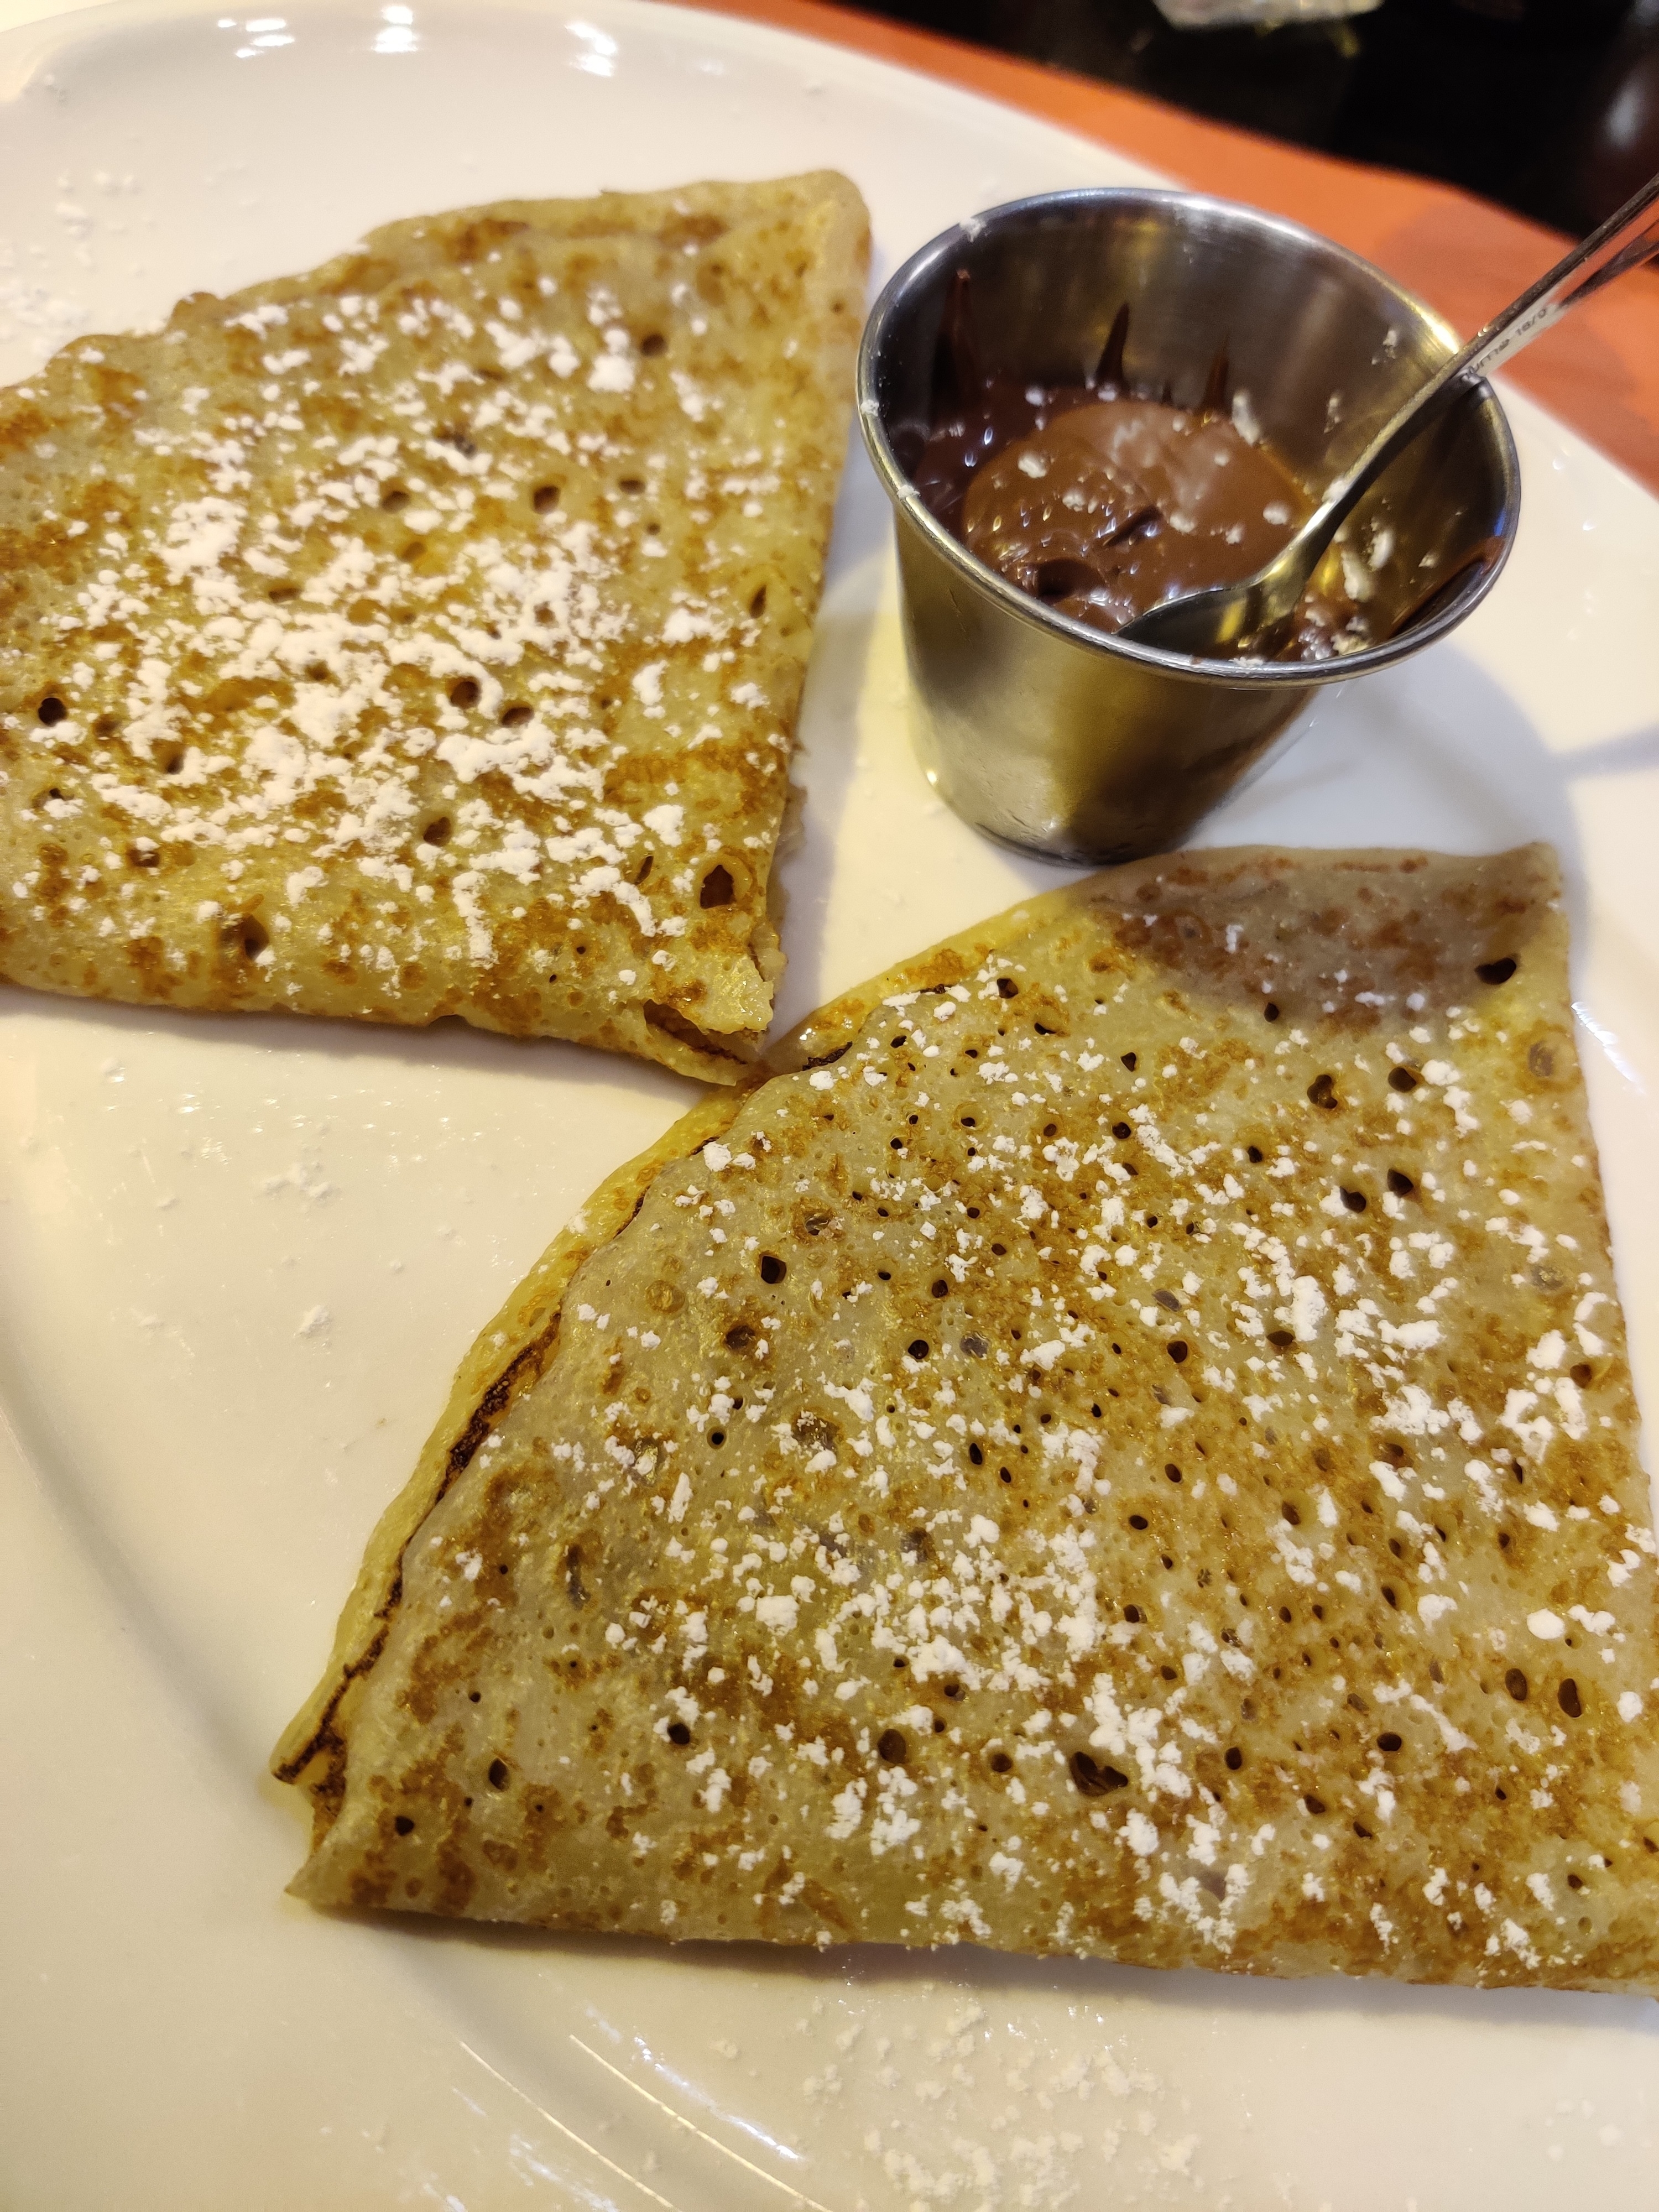 Two triangular crepes lightly dusted with powdered sugar, served with a small metal cup of nutty chocolate spread